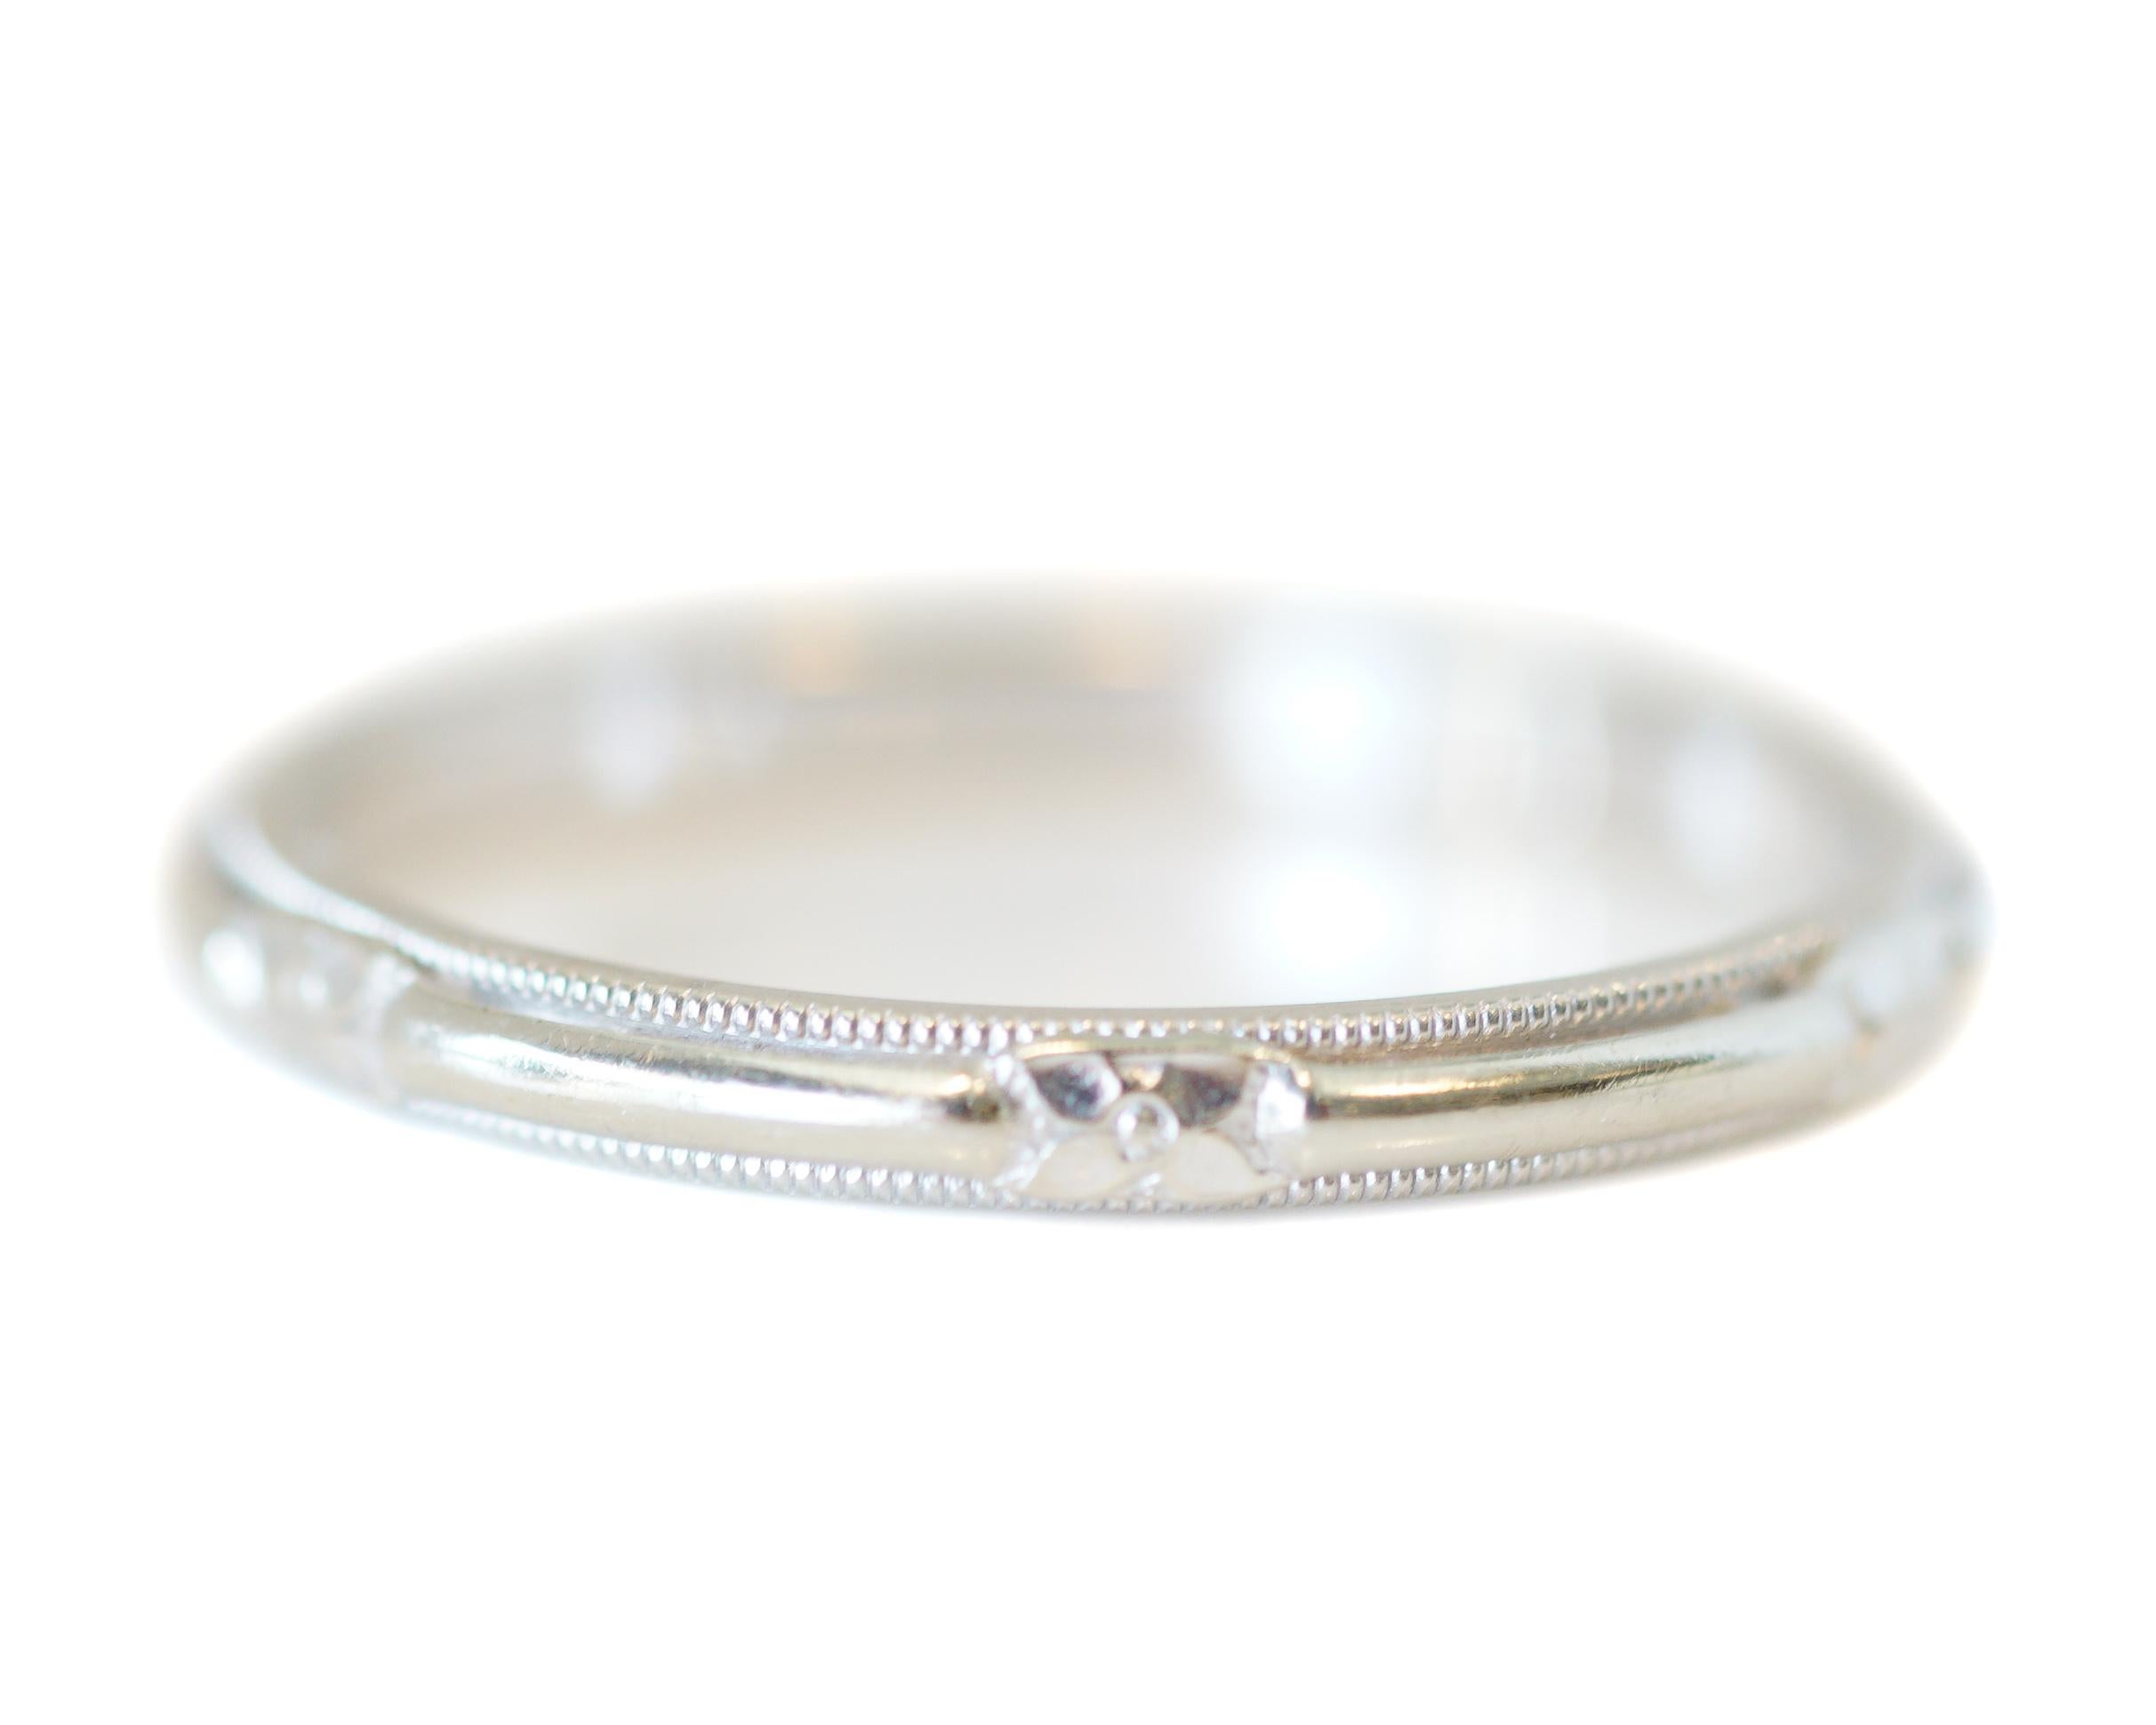 Here we have a classic, elegant, and simple style wedding band. Crafted in 14k white gold, with a visible hallmark inside the shank... this beauty is all antique-charm! Belonging to circa 1930s, on the tail end of art-deco era... it features lovely